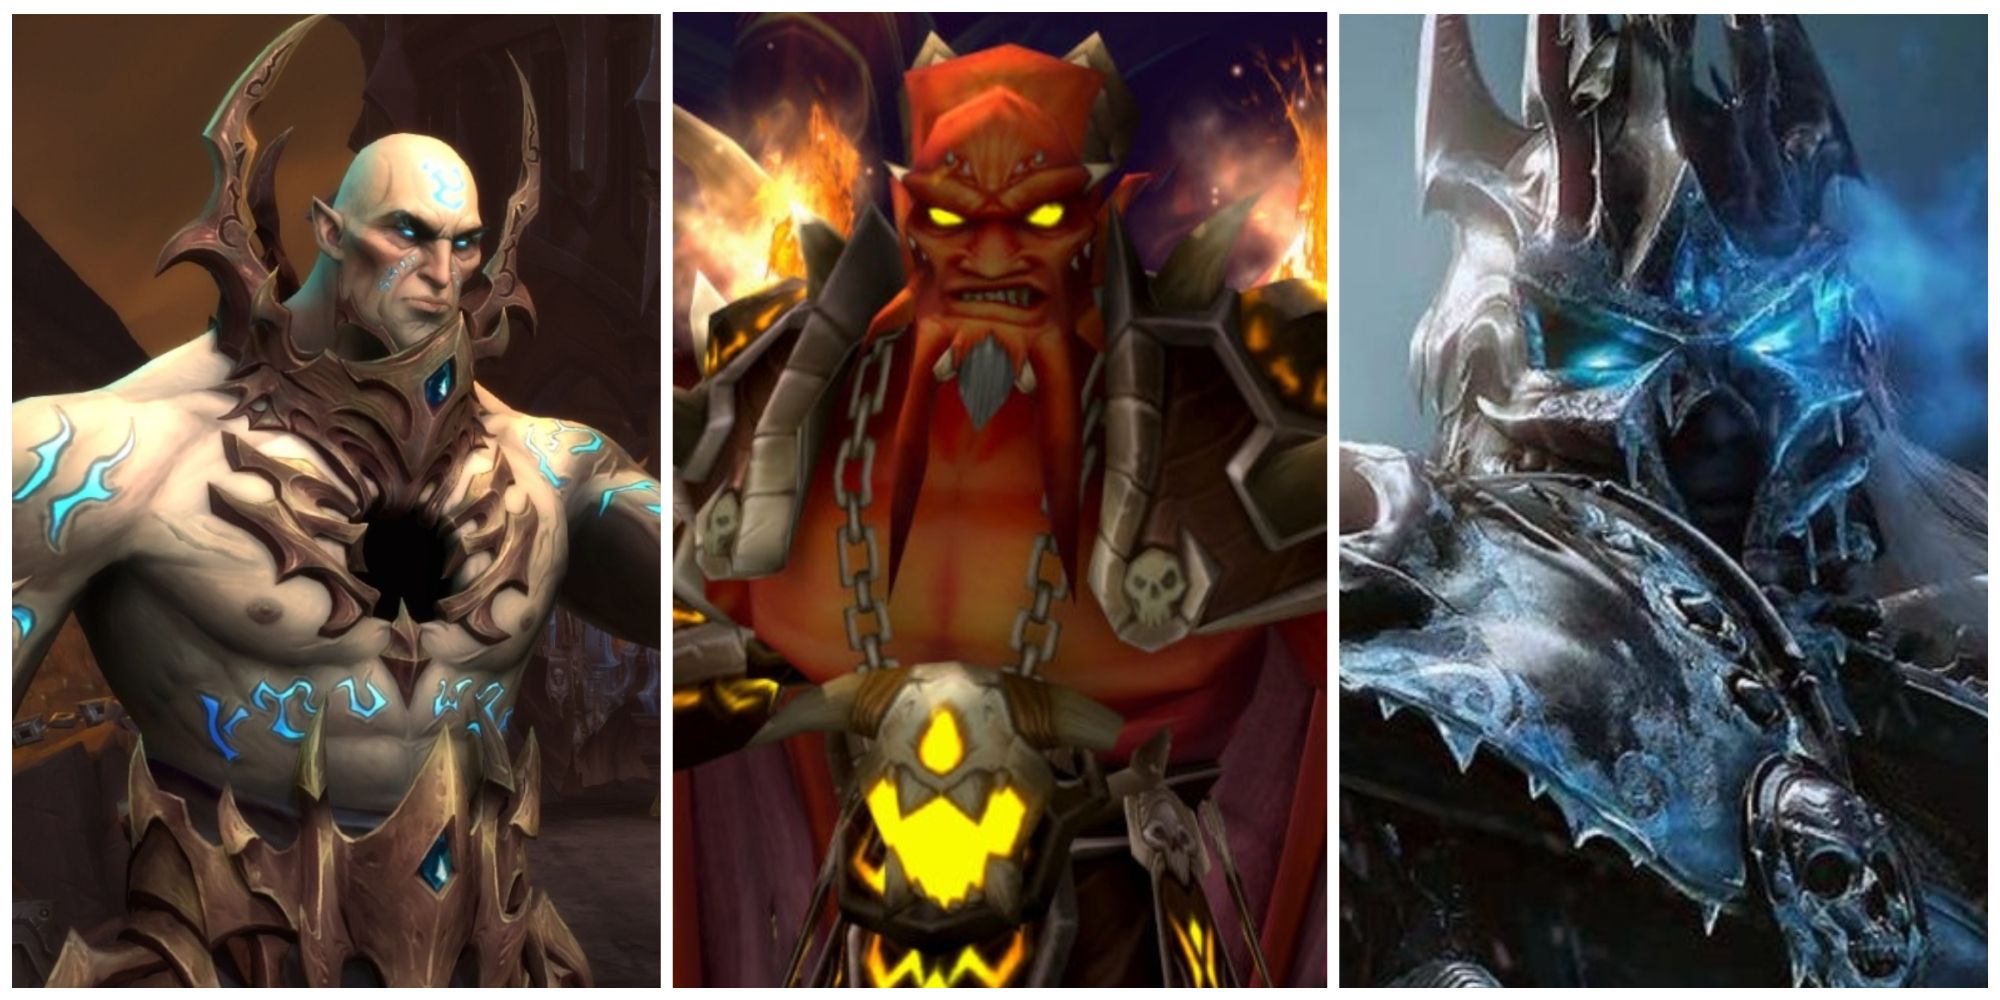 Bosses in World of Warcraft - Zovaal, Kil'Jaeden, The Lich King